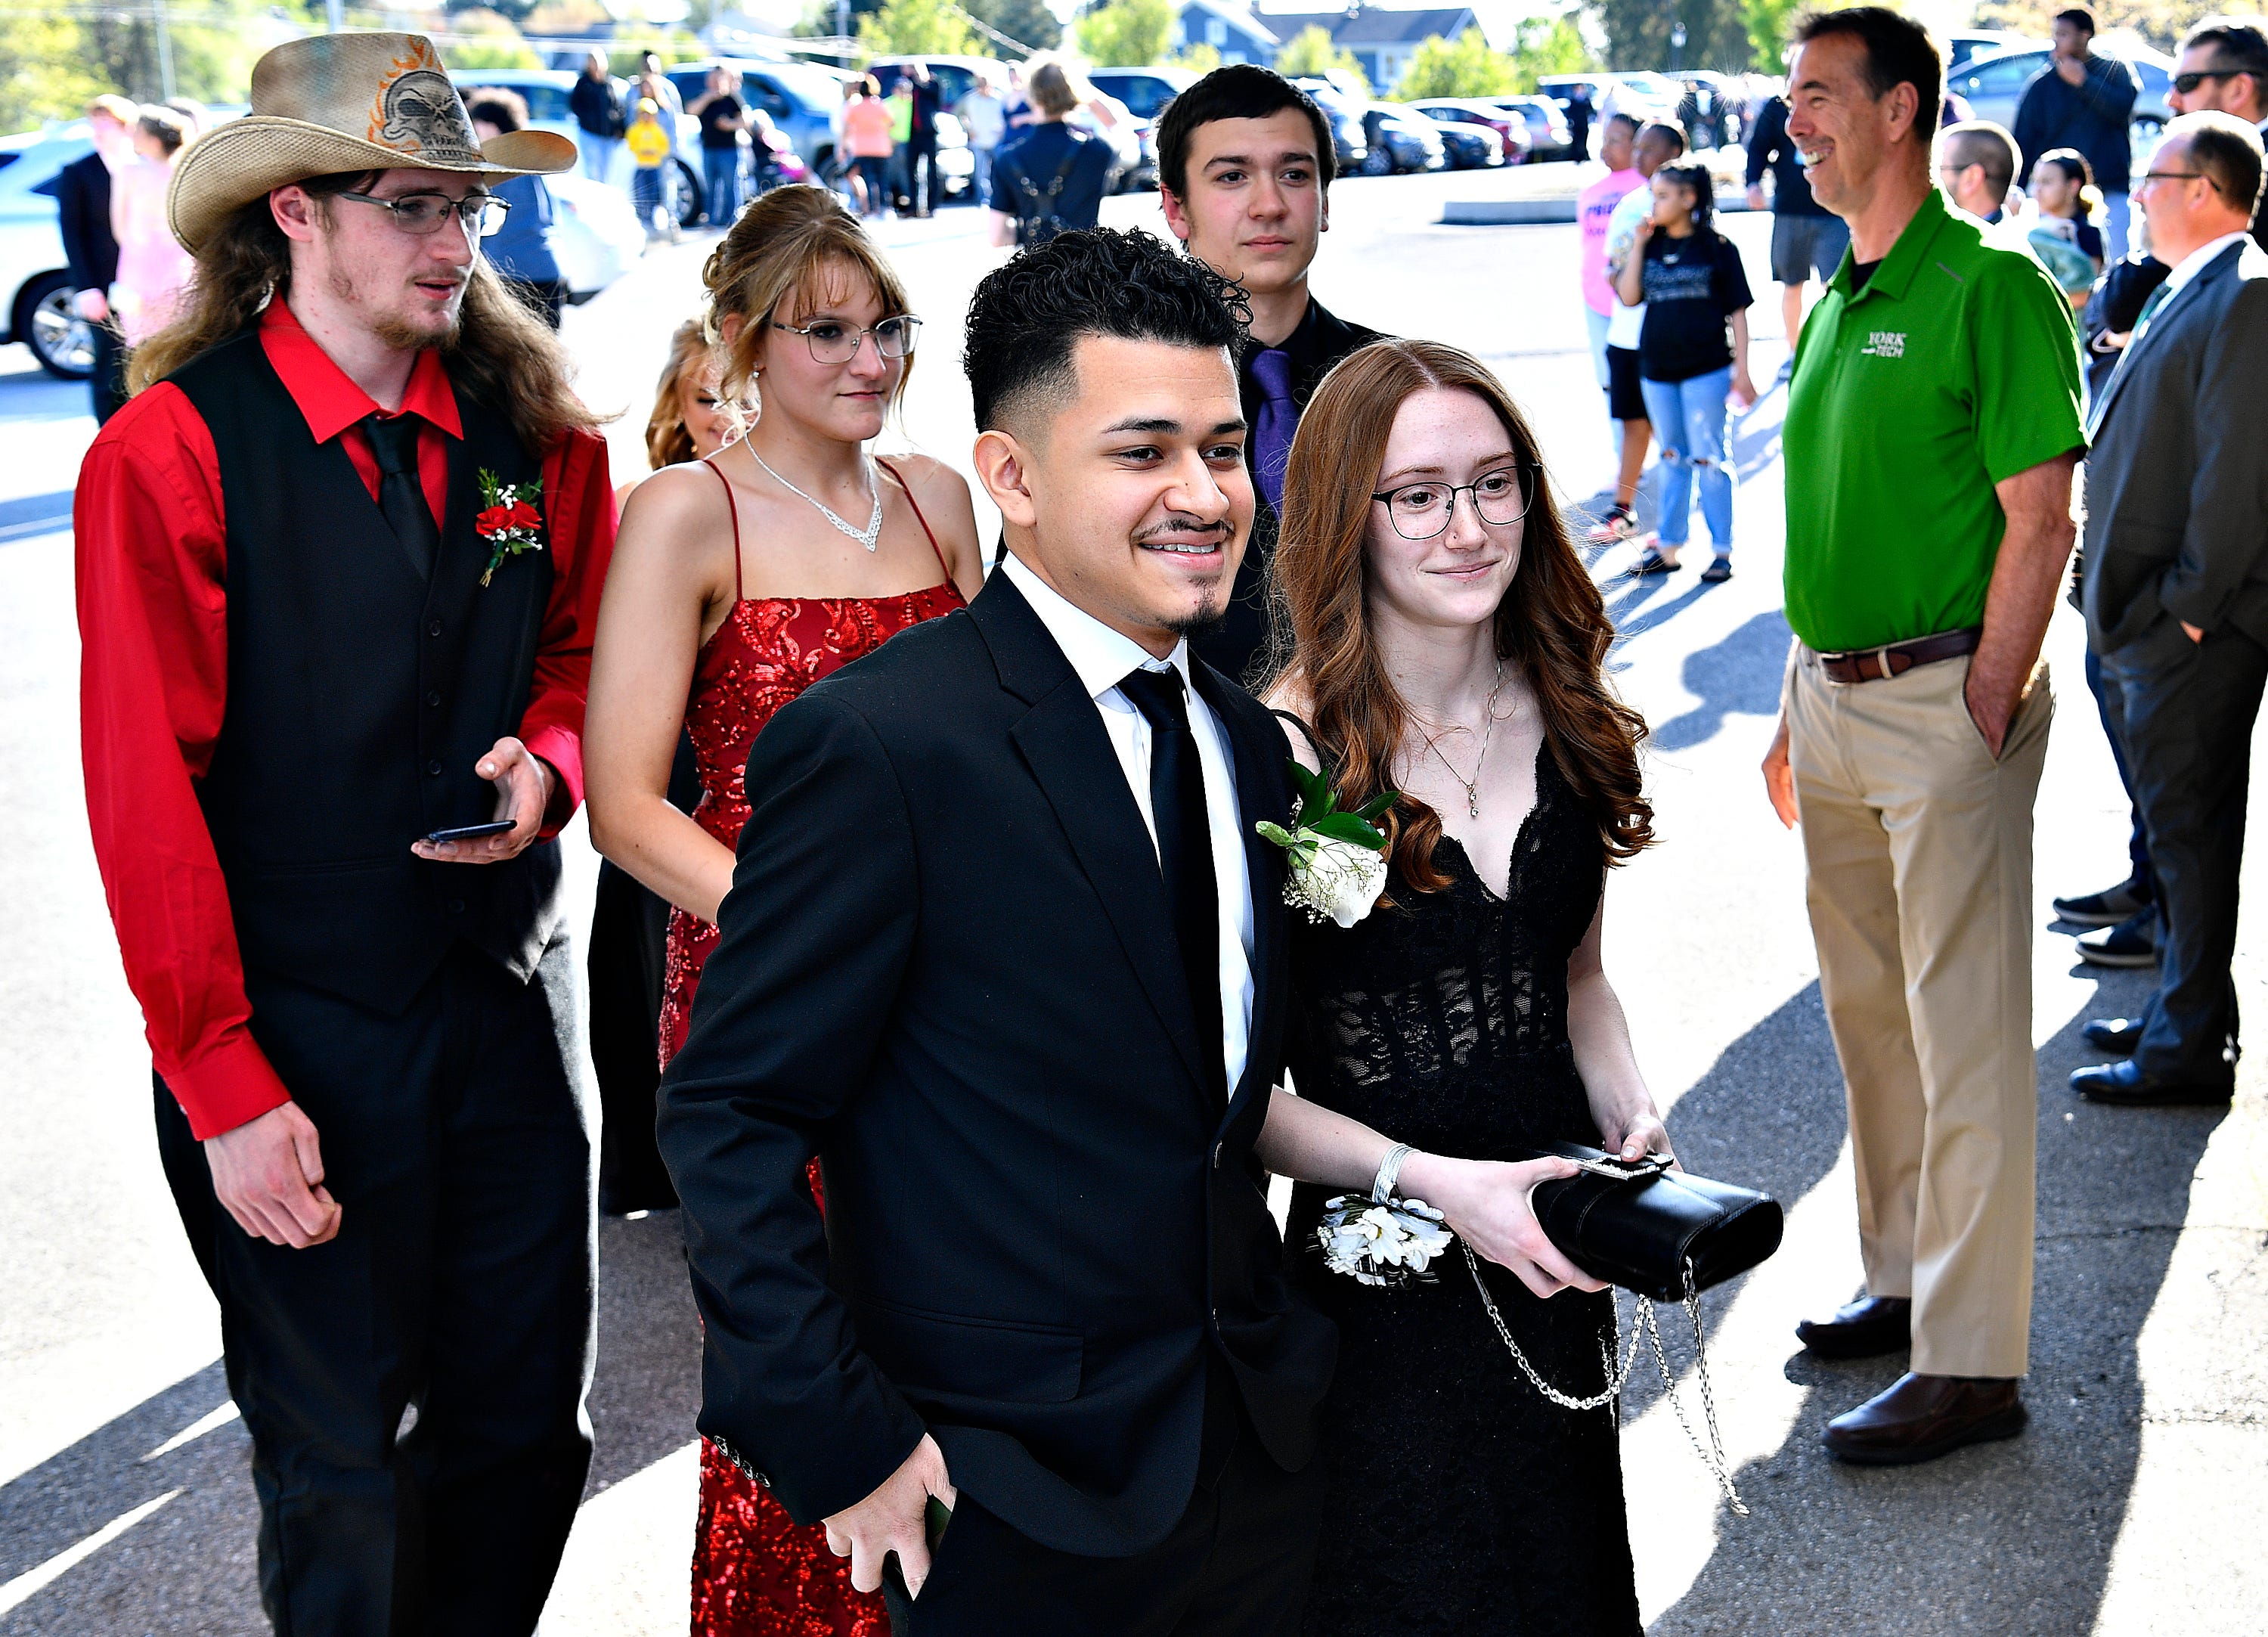 Students and their guests arrive for the York County School of Technology prom at Wisehaven Event Center in Windsor Township, Friday, April 26, 2024. (Dawn J. Sagert/The York Dispatch)